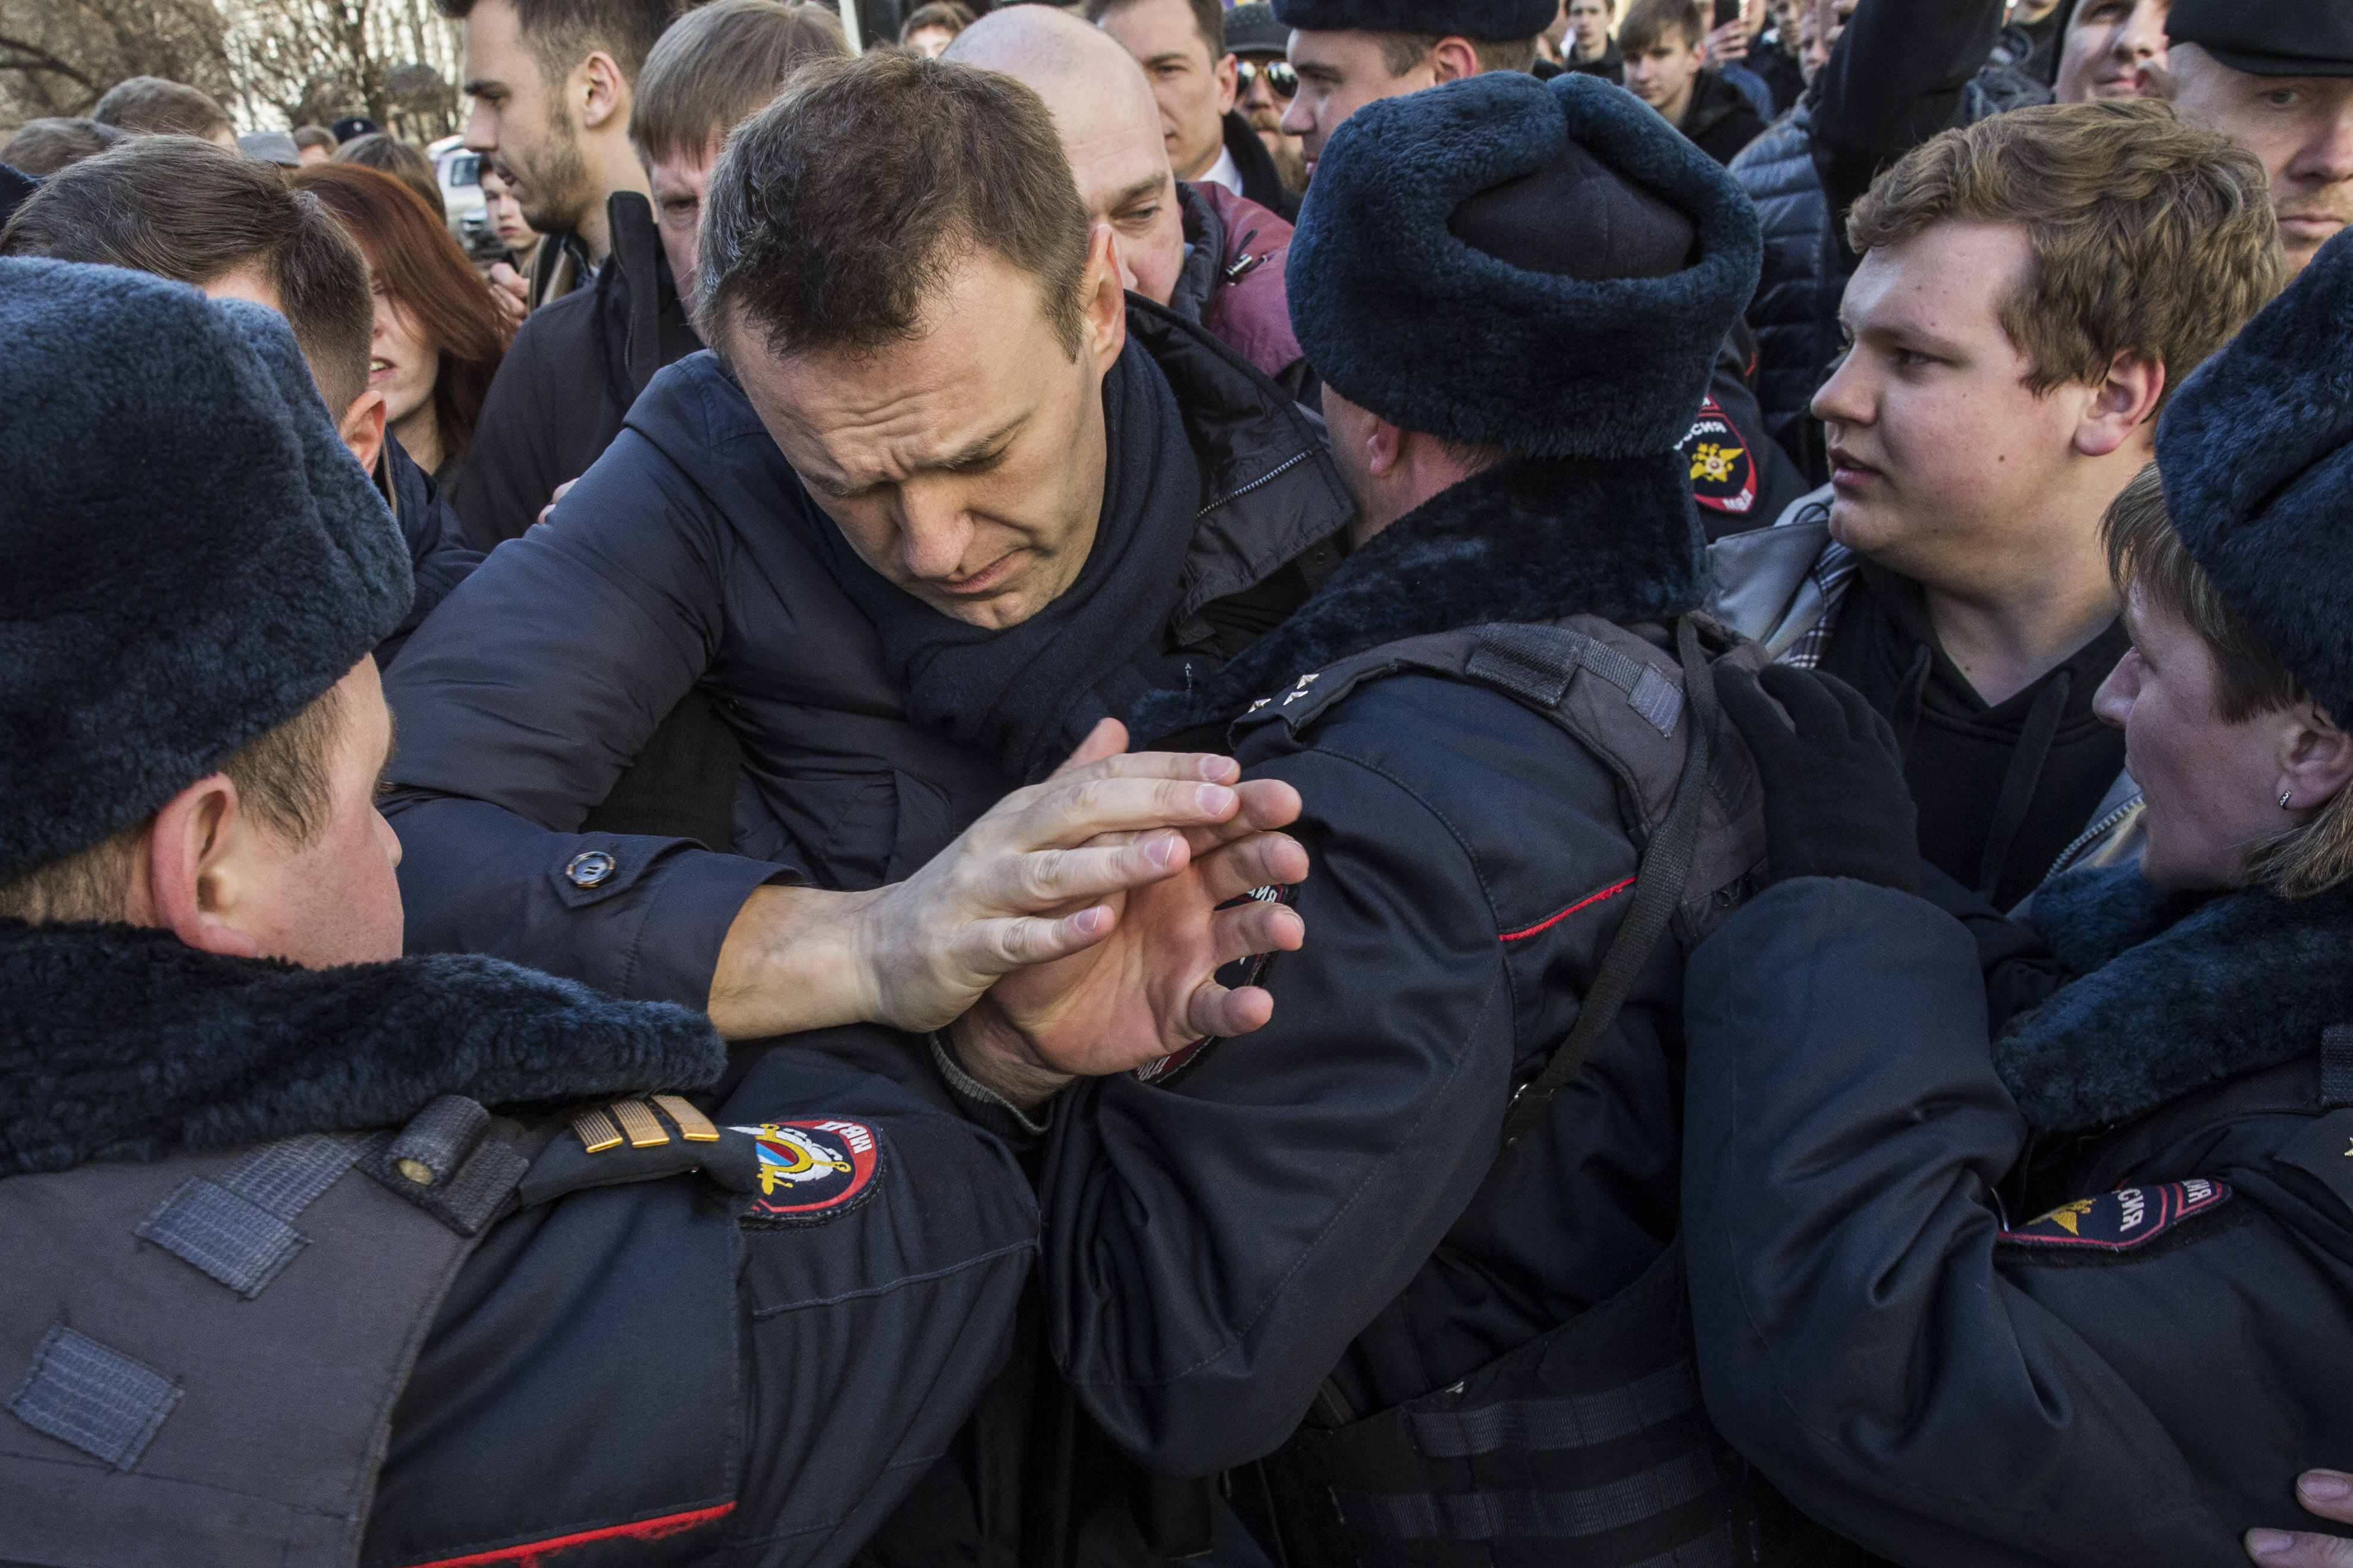 Russian dissident Alexei Navalny’s lawyers arrested on extremism charges